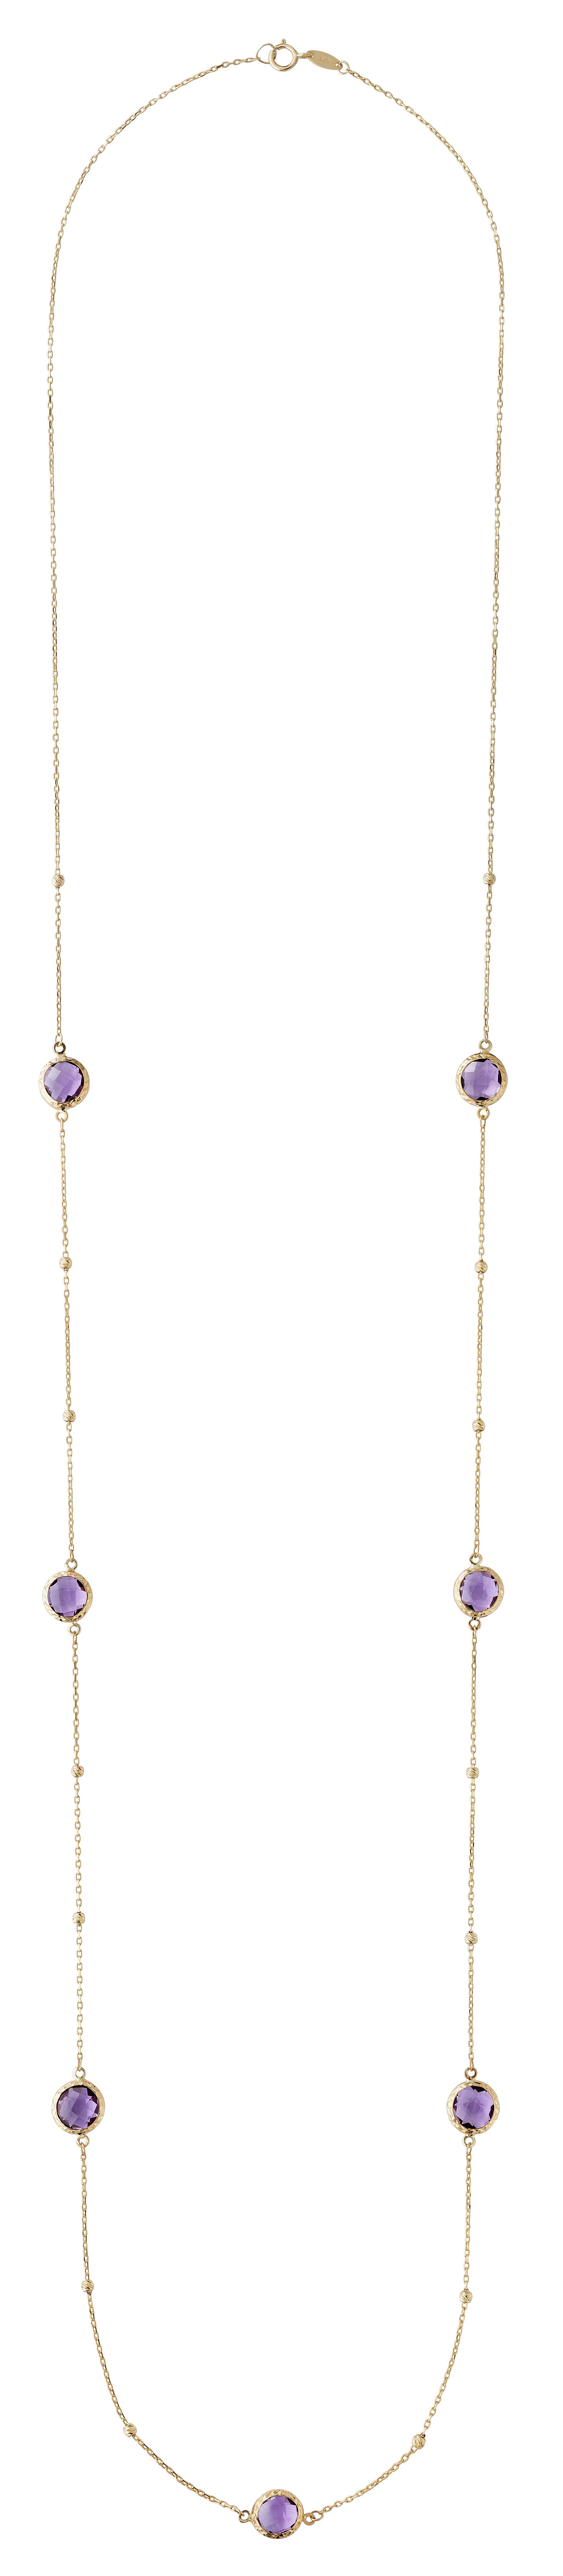 Revere 9ct Gold Amethyst Long 36inch Necklace Review